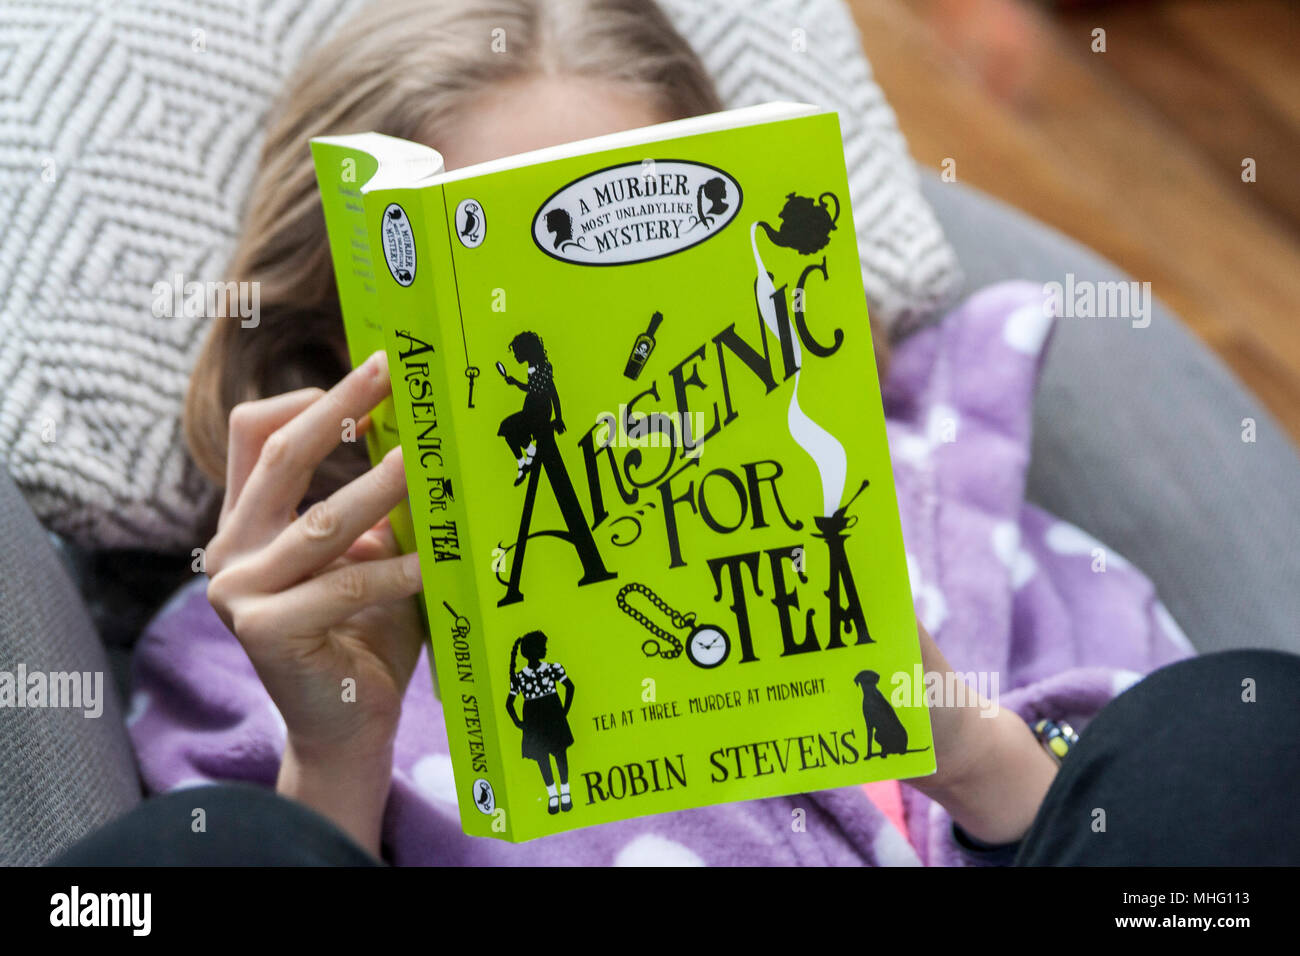 Child, girl kid, reading a murder mystery book, Arsenic for Tea, by Robin Stevens, Green Cover reading concept, bookworm, love reading Stock Photo